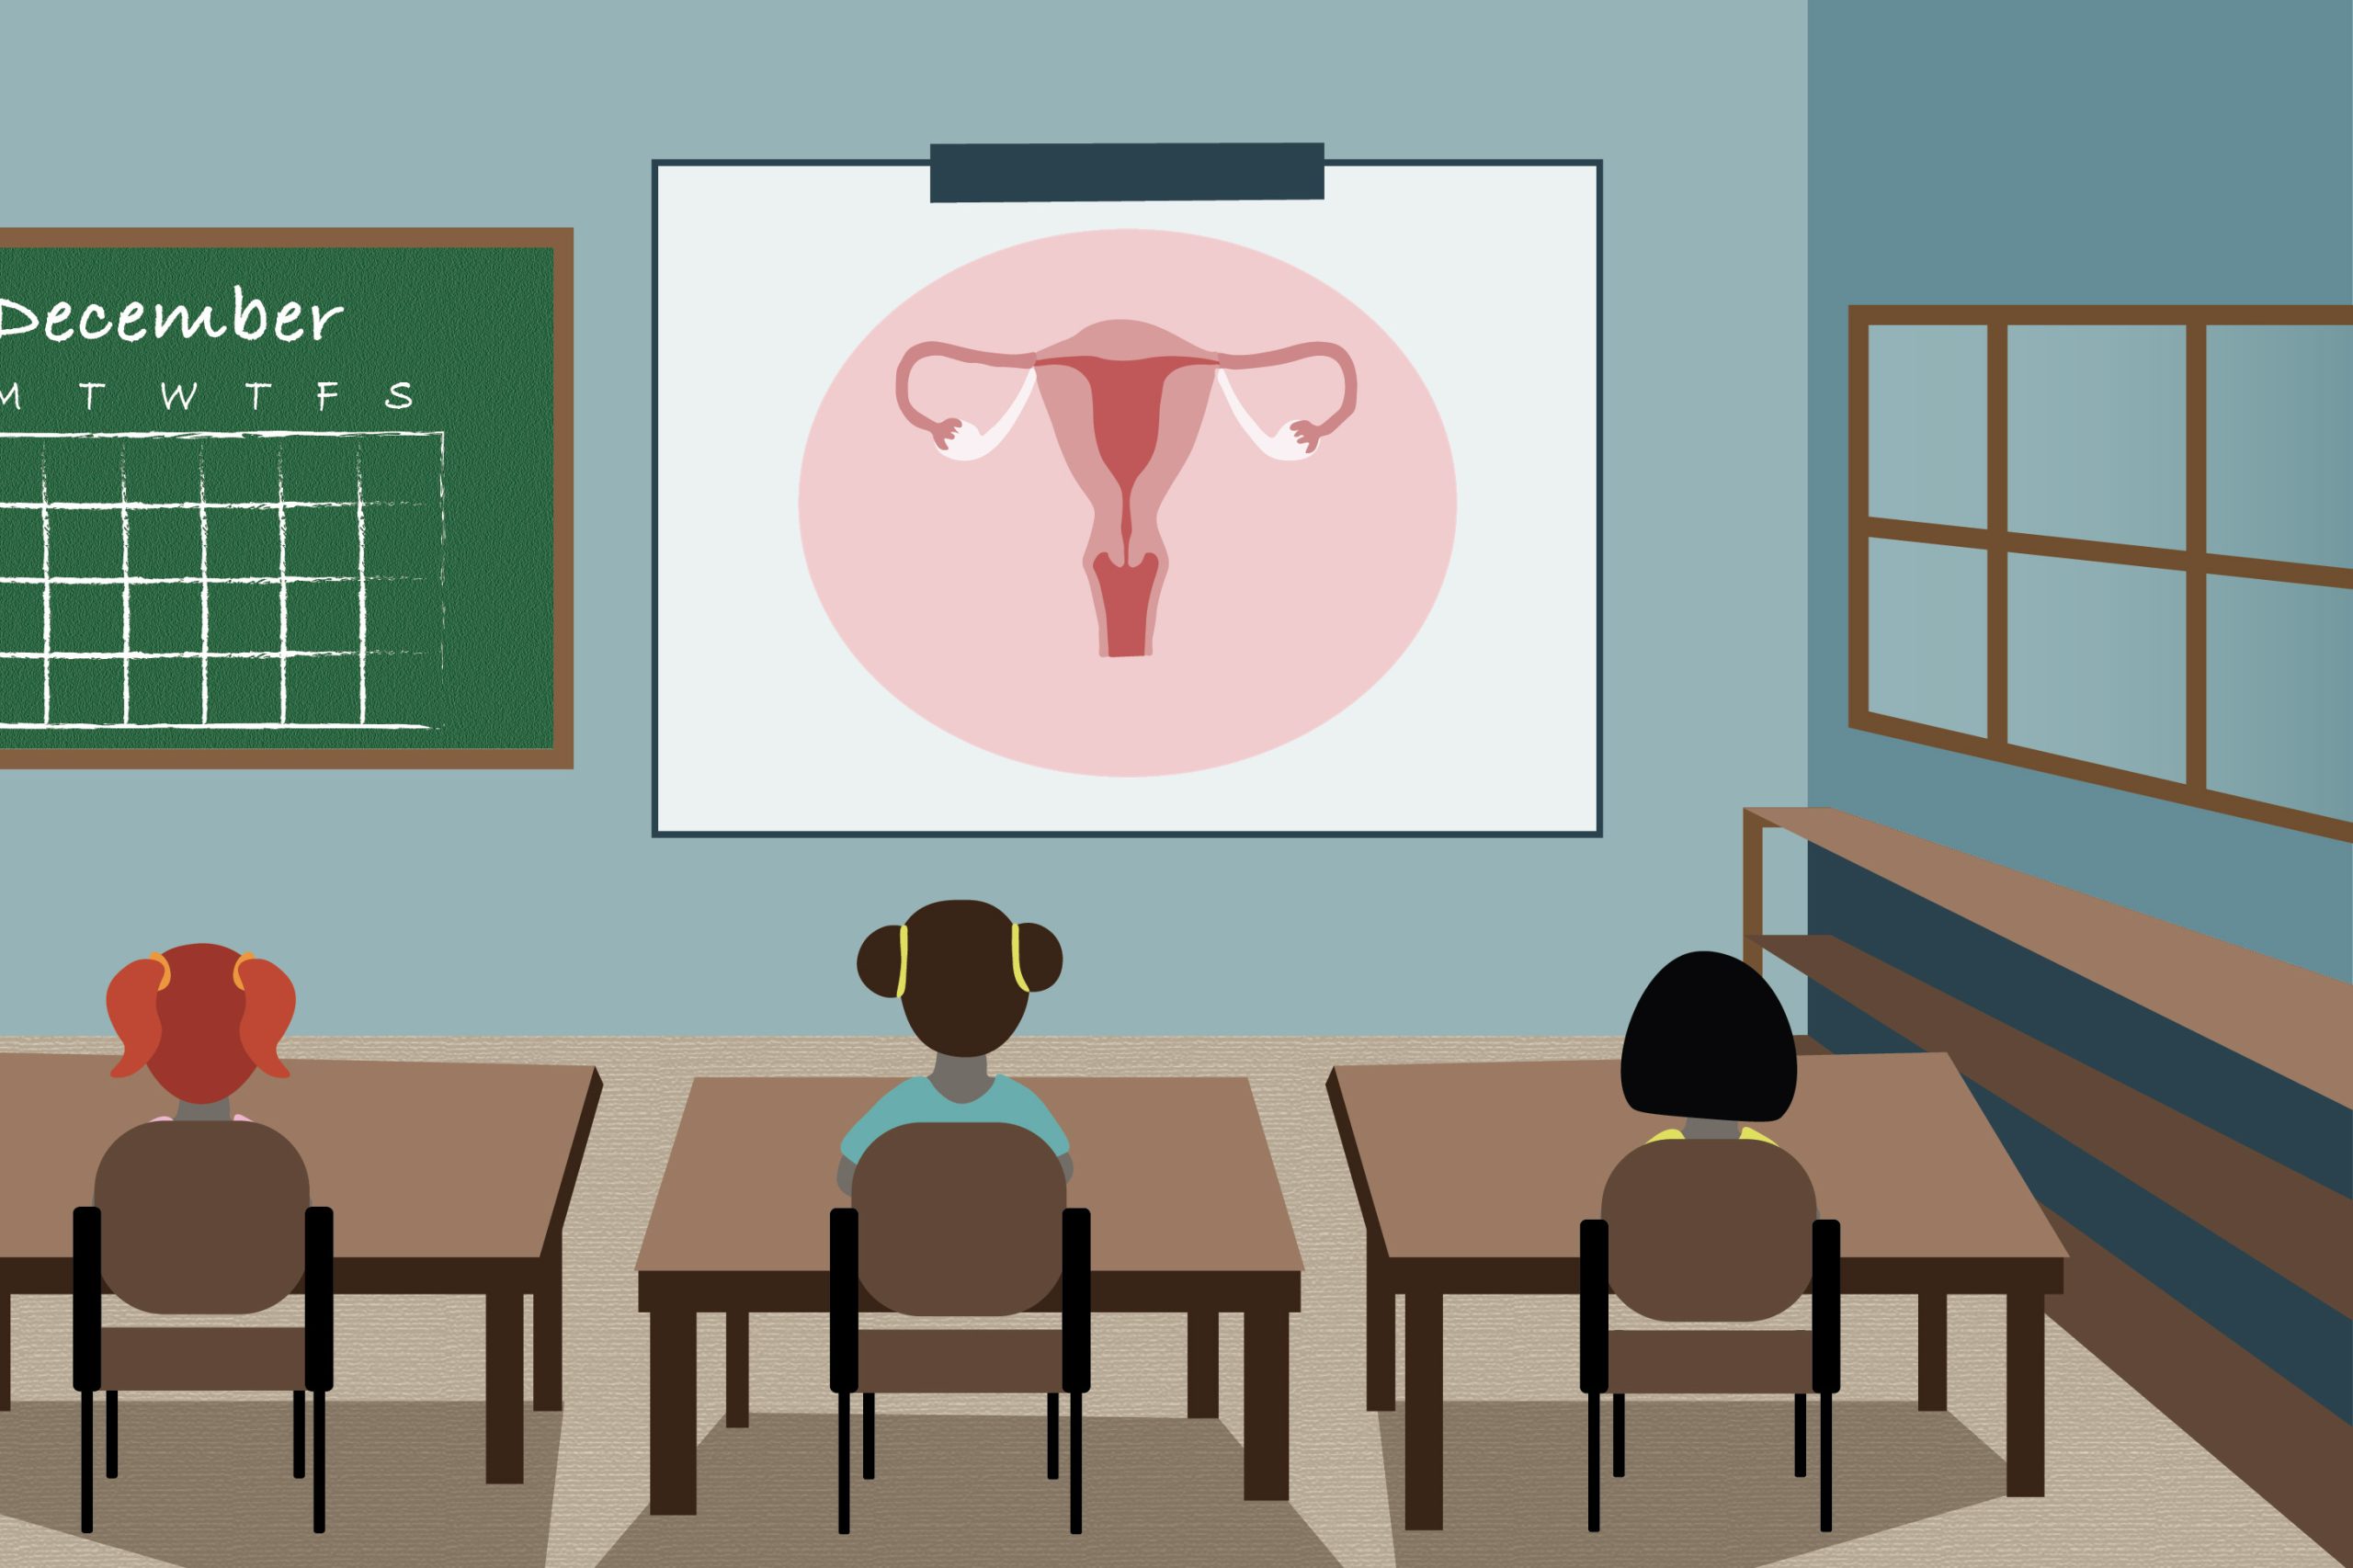 Sex education in America still fails to properly educate